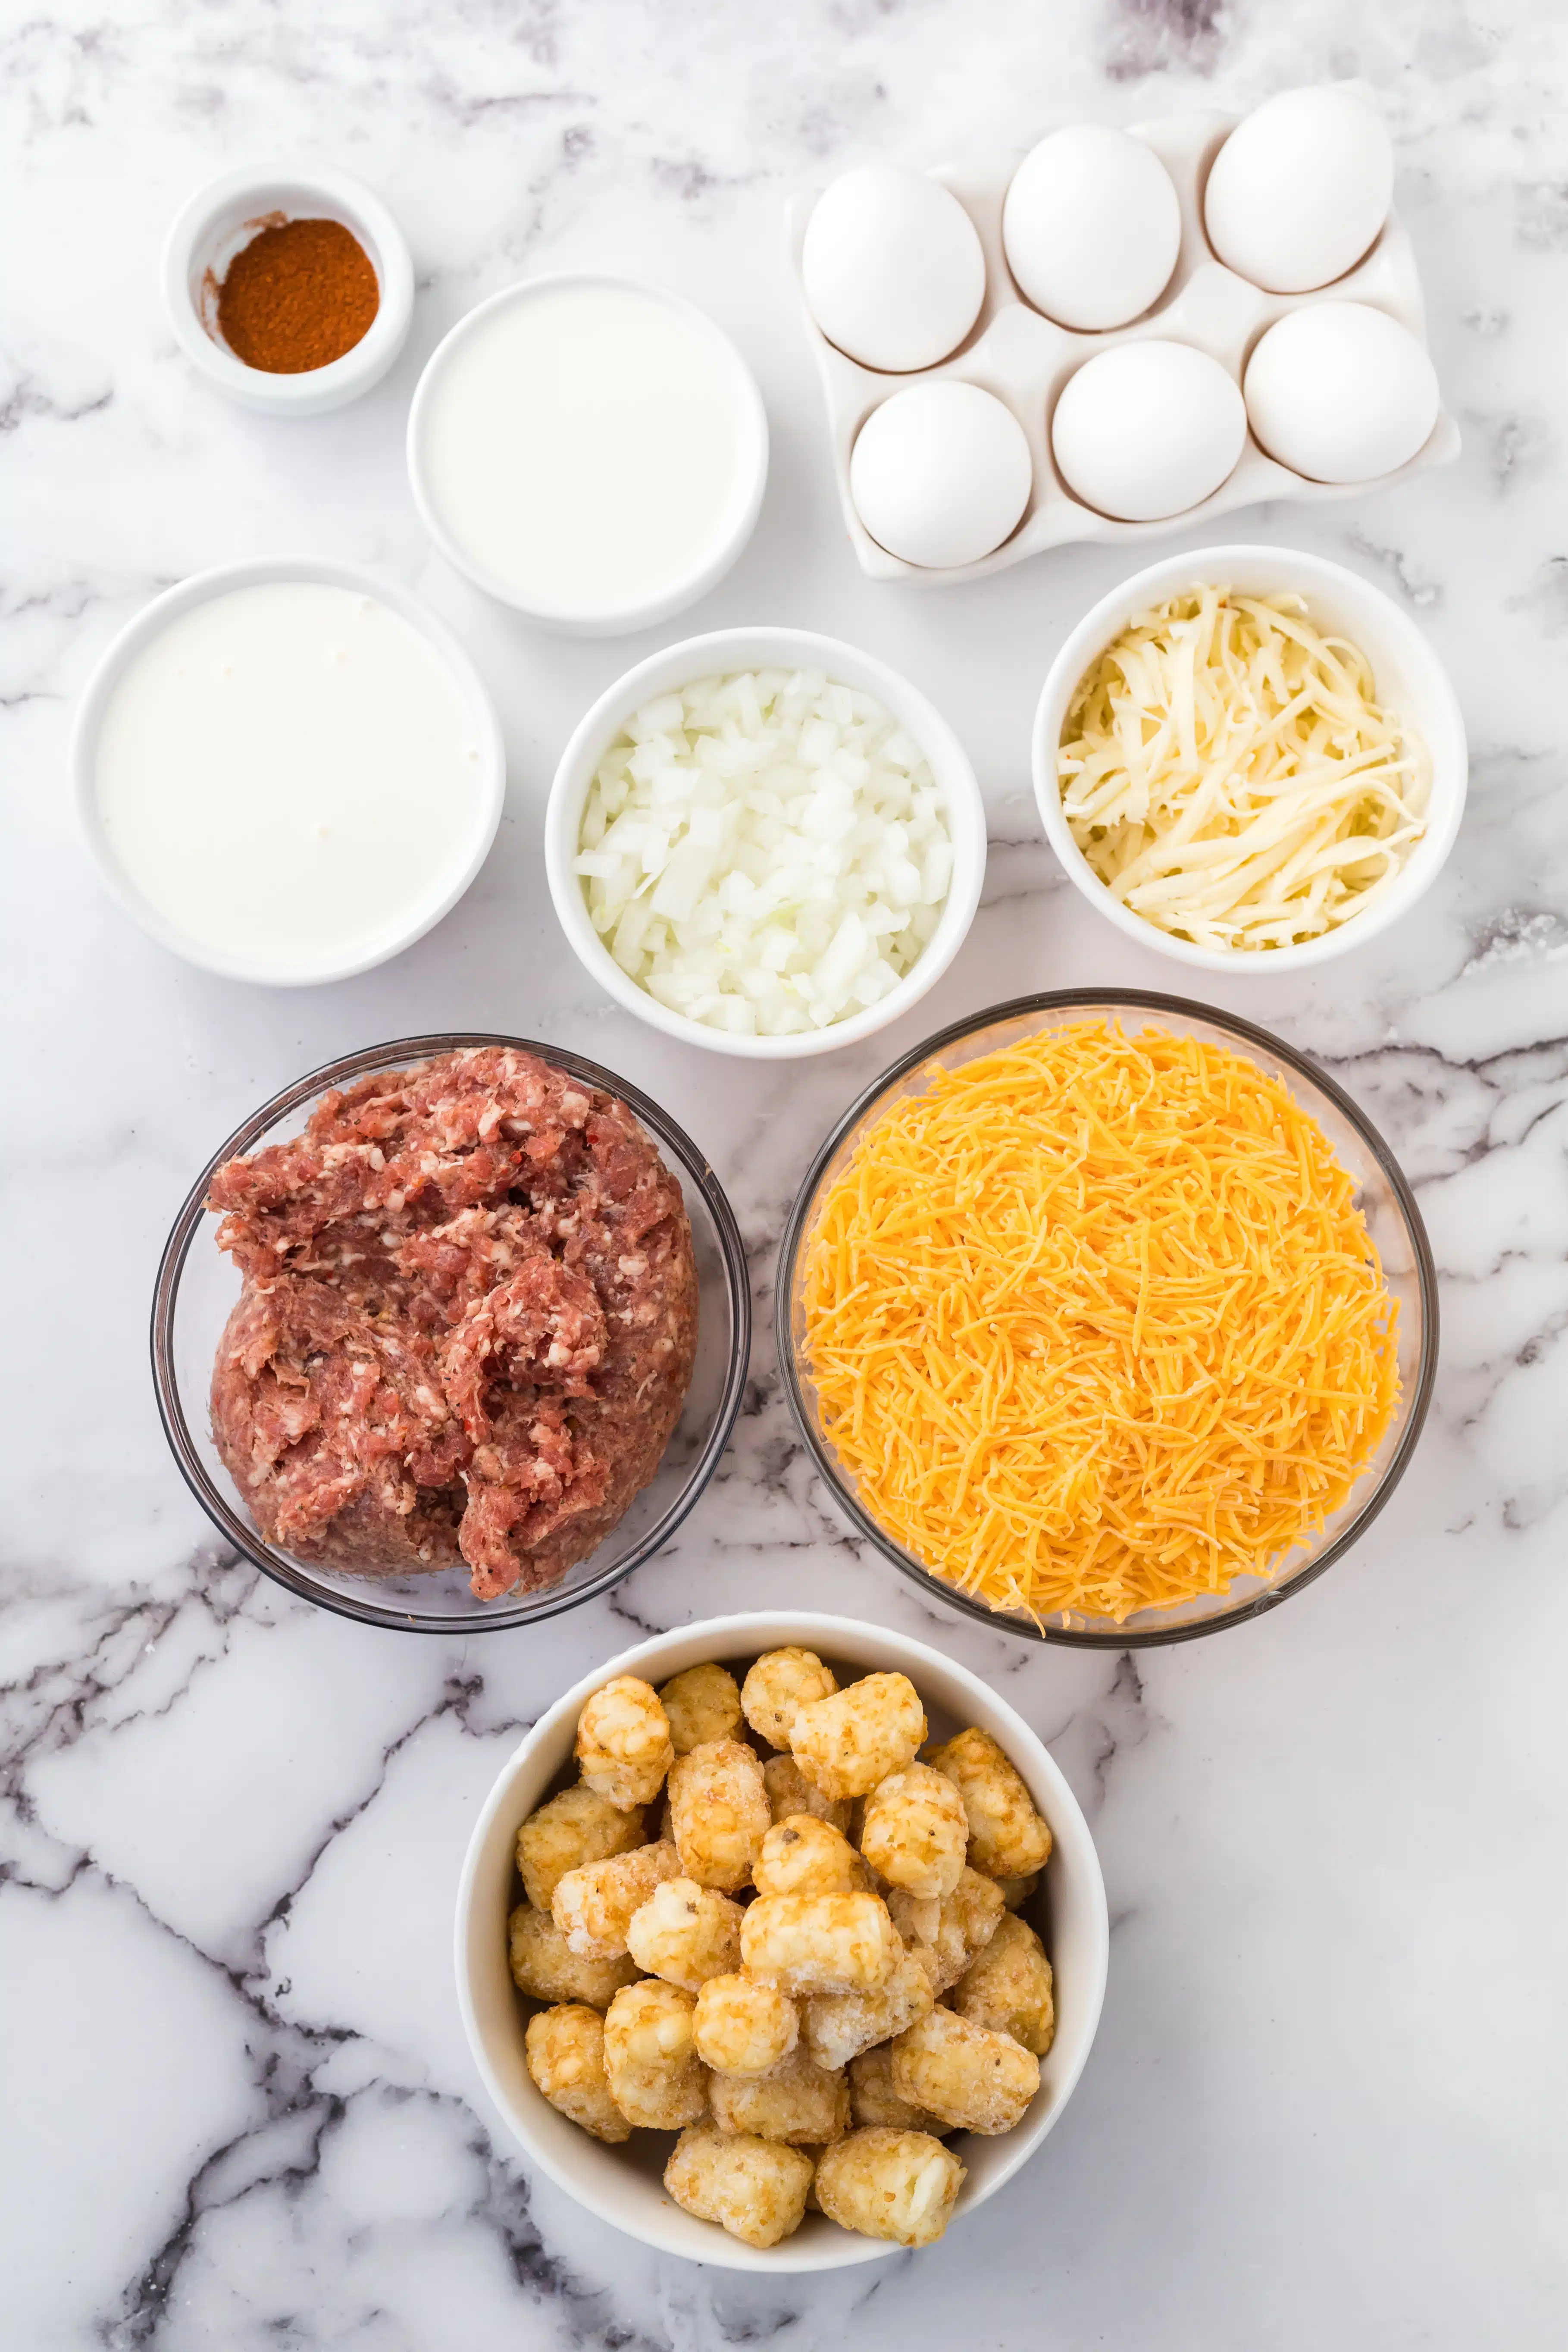 Ingredients for a breakfast casserole with tater tots set aside in individual serving bowls.